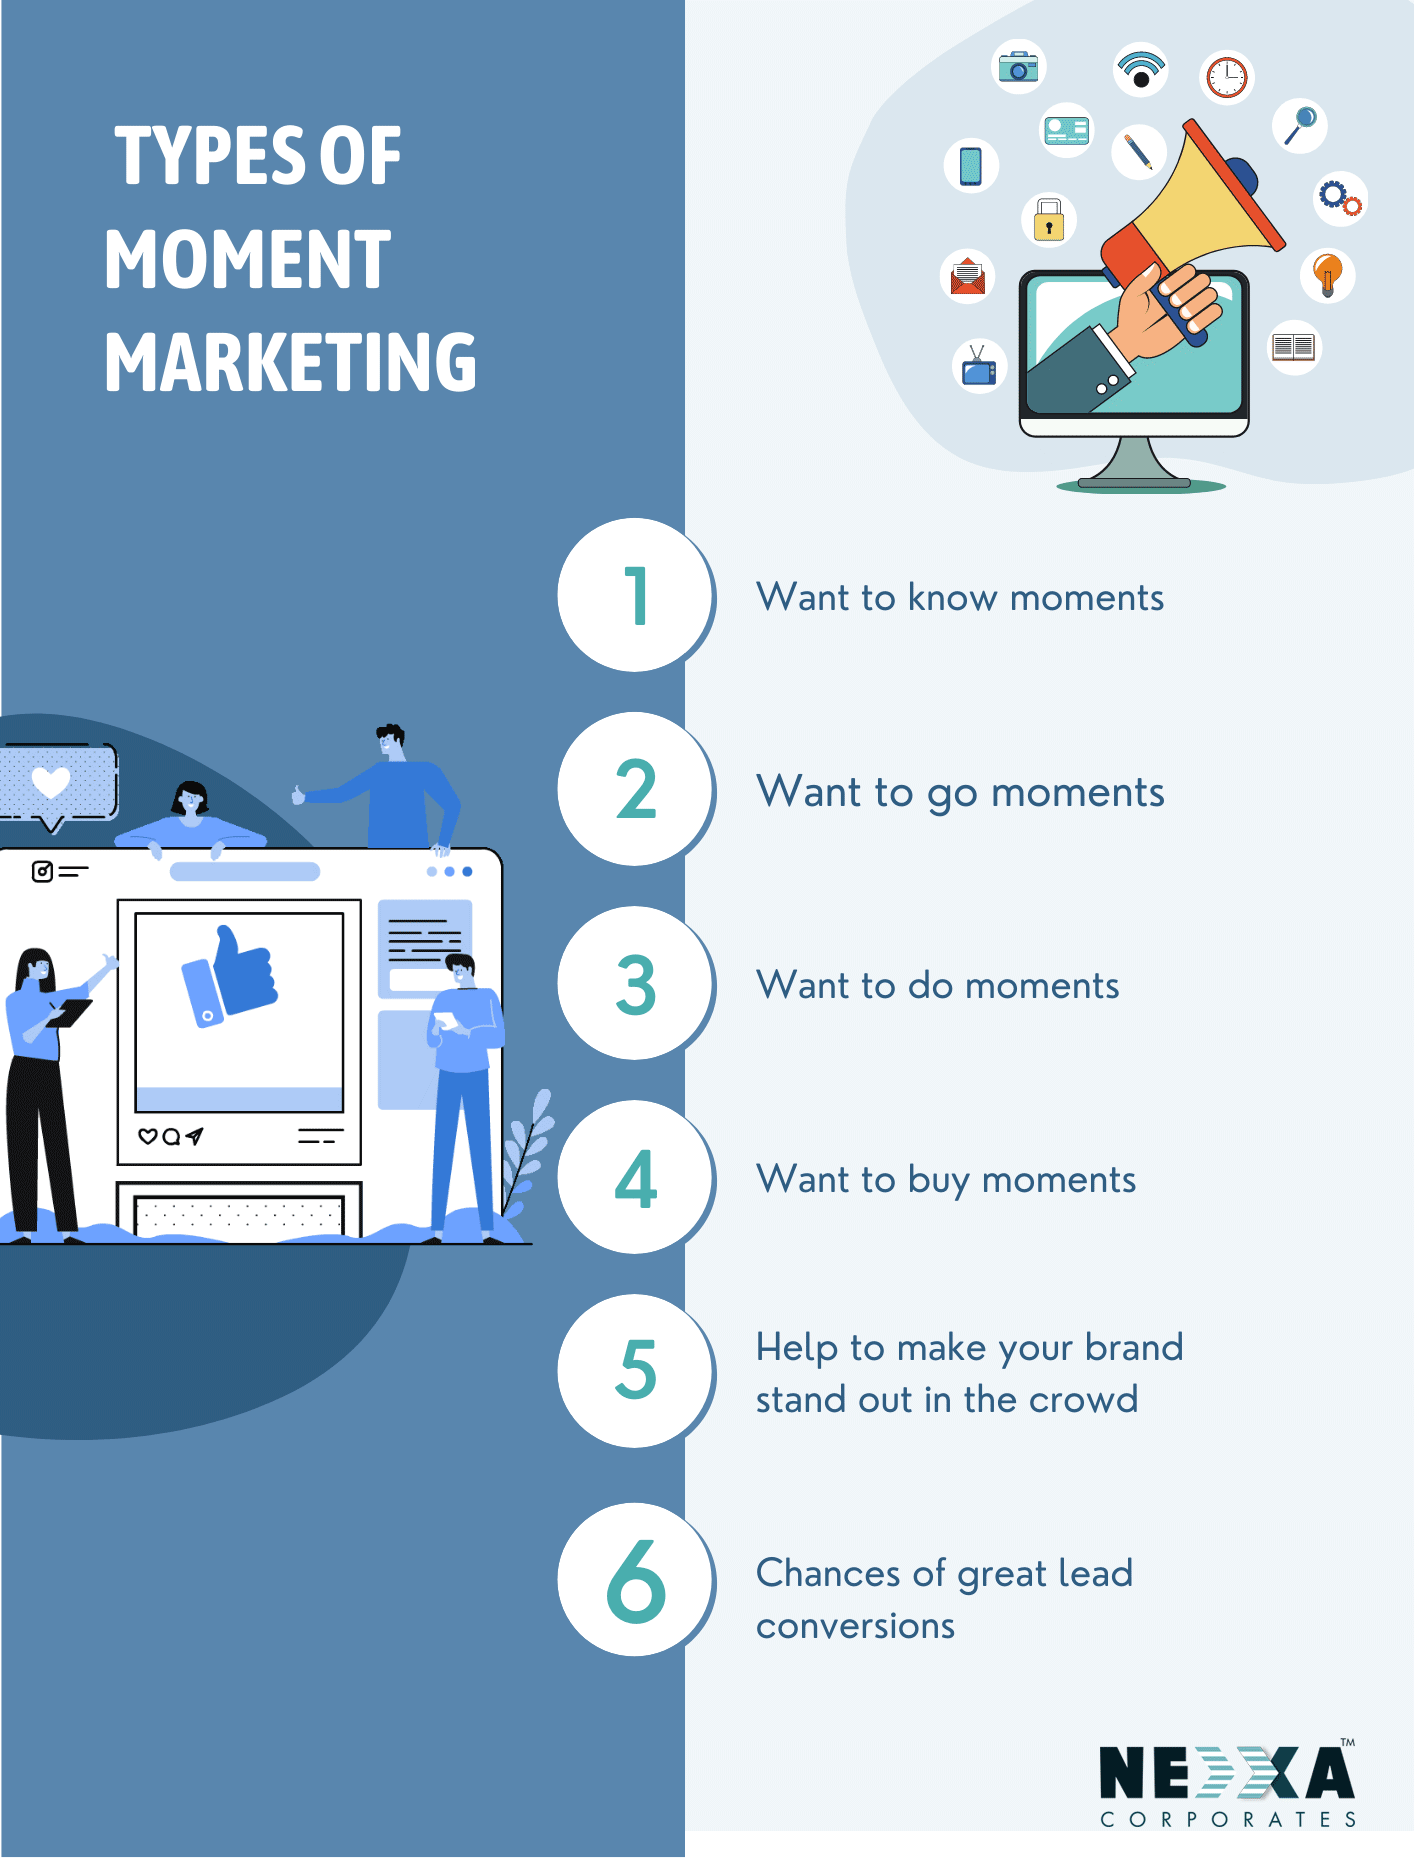  types of moment marketing